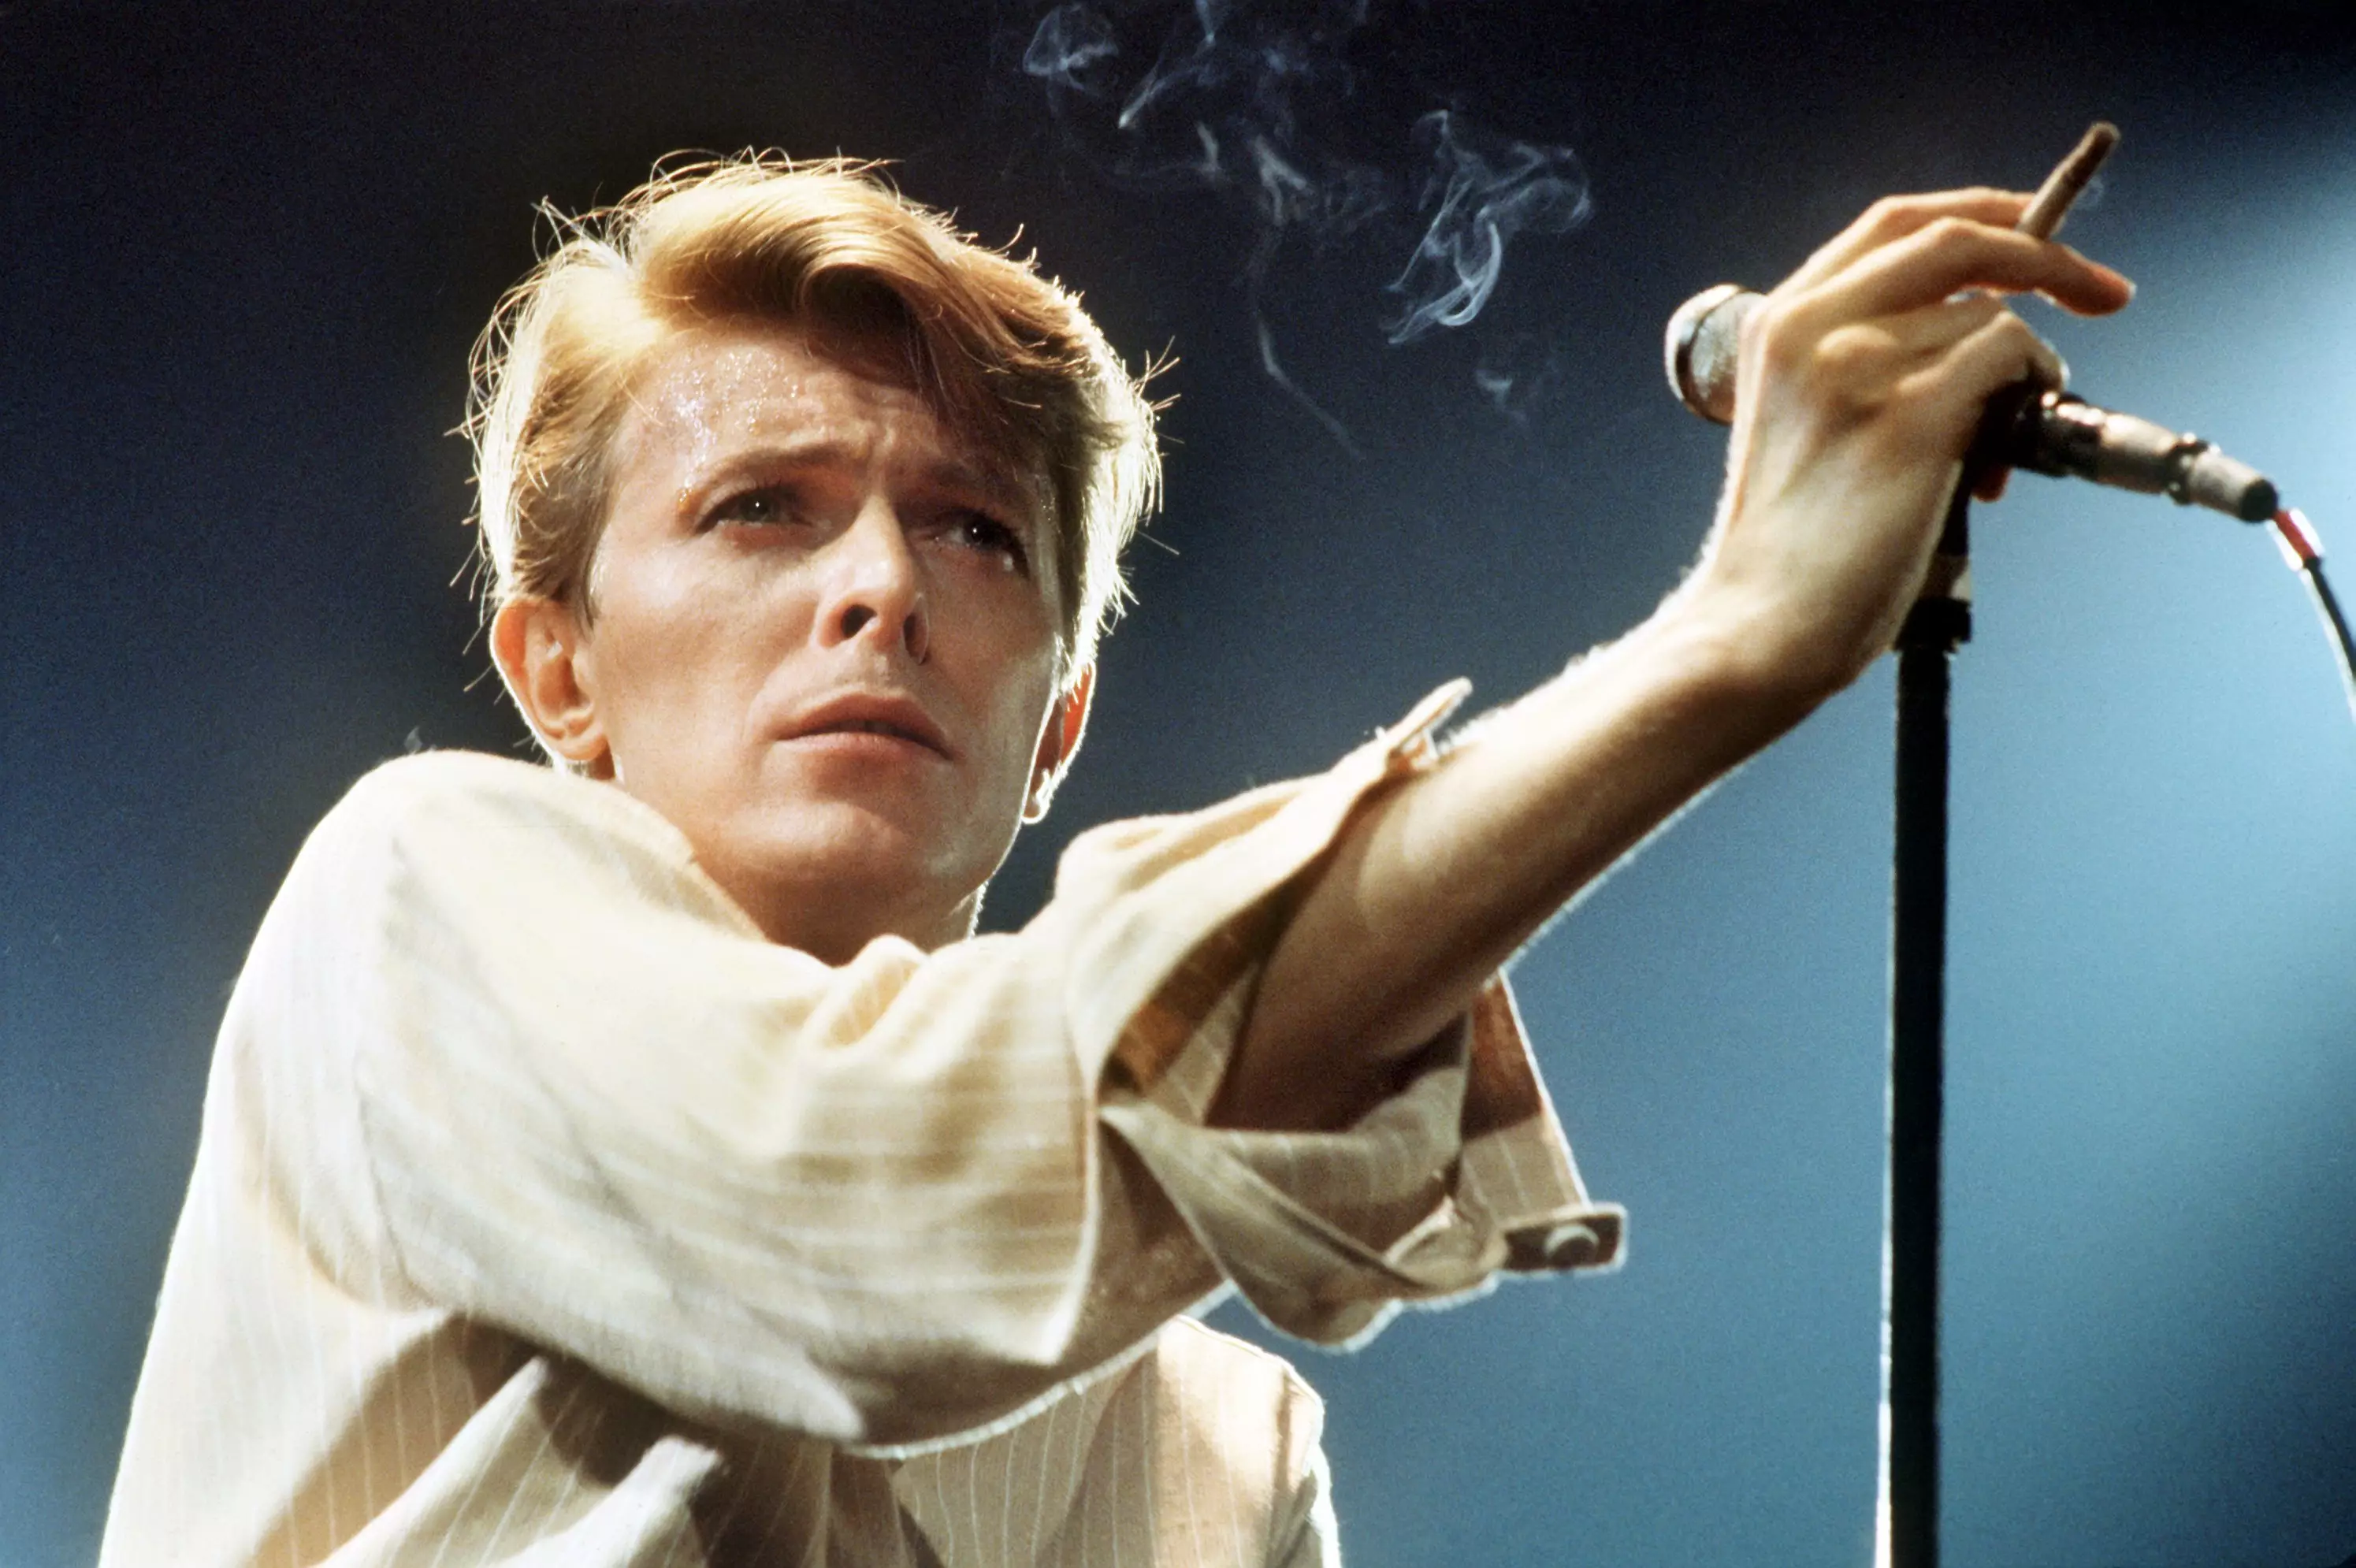 Bowie turned down the role, saying he didn't want to spend five months on a mountain.